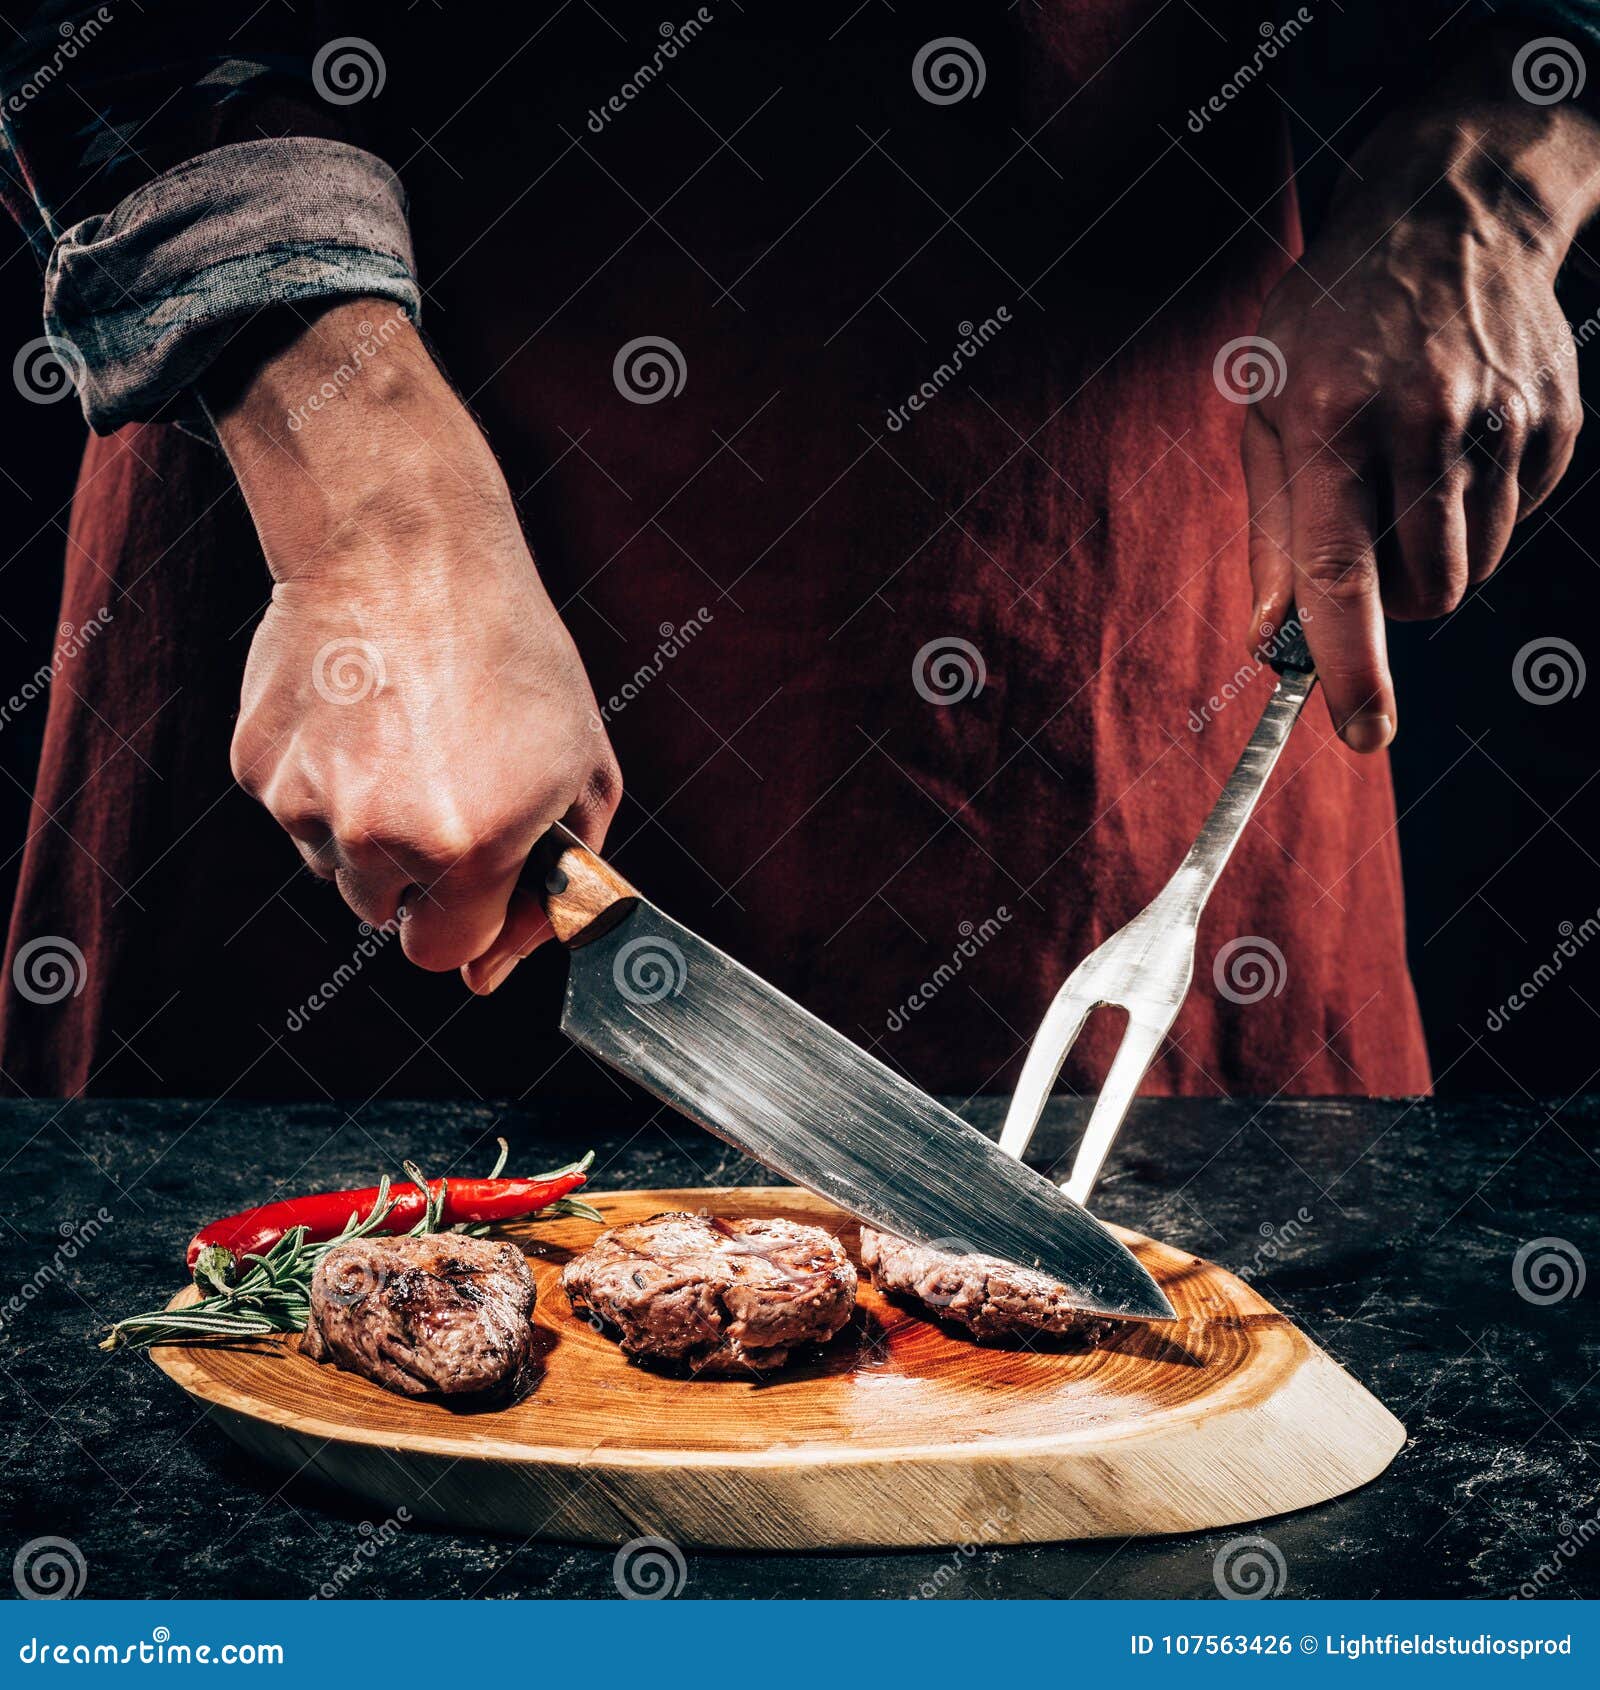 https://thumbs.dreamstime.com/z/close-up-partial-view-chef-apron-meat-fork-knife-slicing-gourmet-grilled-steaks-rosemary-chili-pepper-107563426.jpg